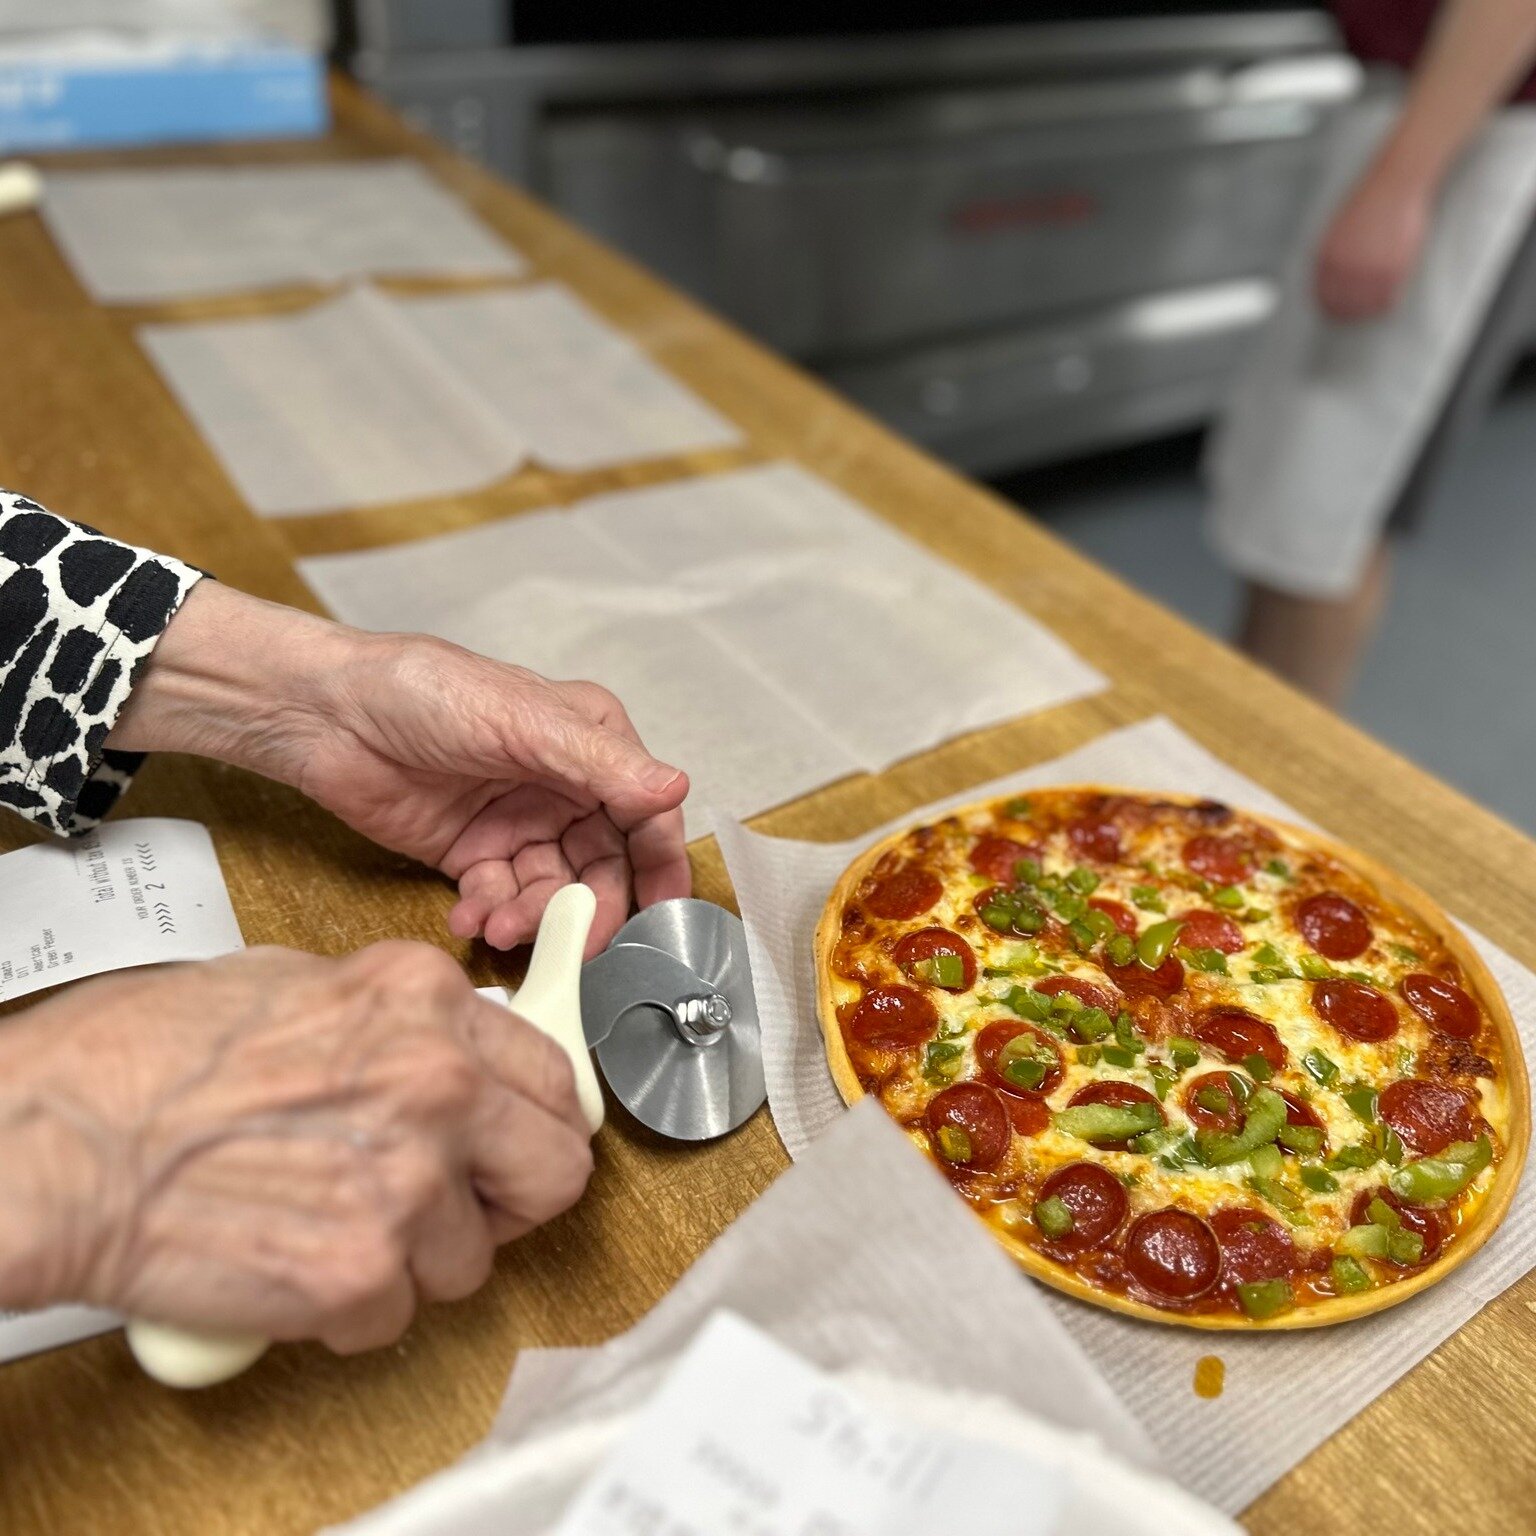 🍕 From slicing up the perfect pizza to sharing the secrets of crafting an authentic Tri City Pizza, Linda is the heart and history of our tiny pizzeria. These hands have crafted thousands of Tri Pies over the years, and we are fortunate to have her 